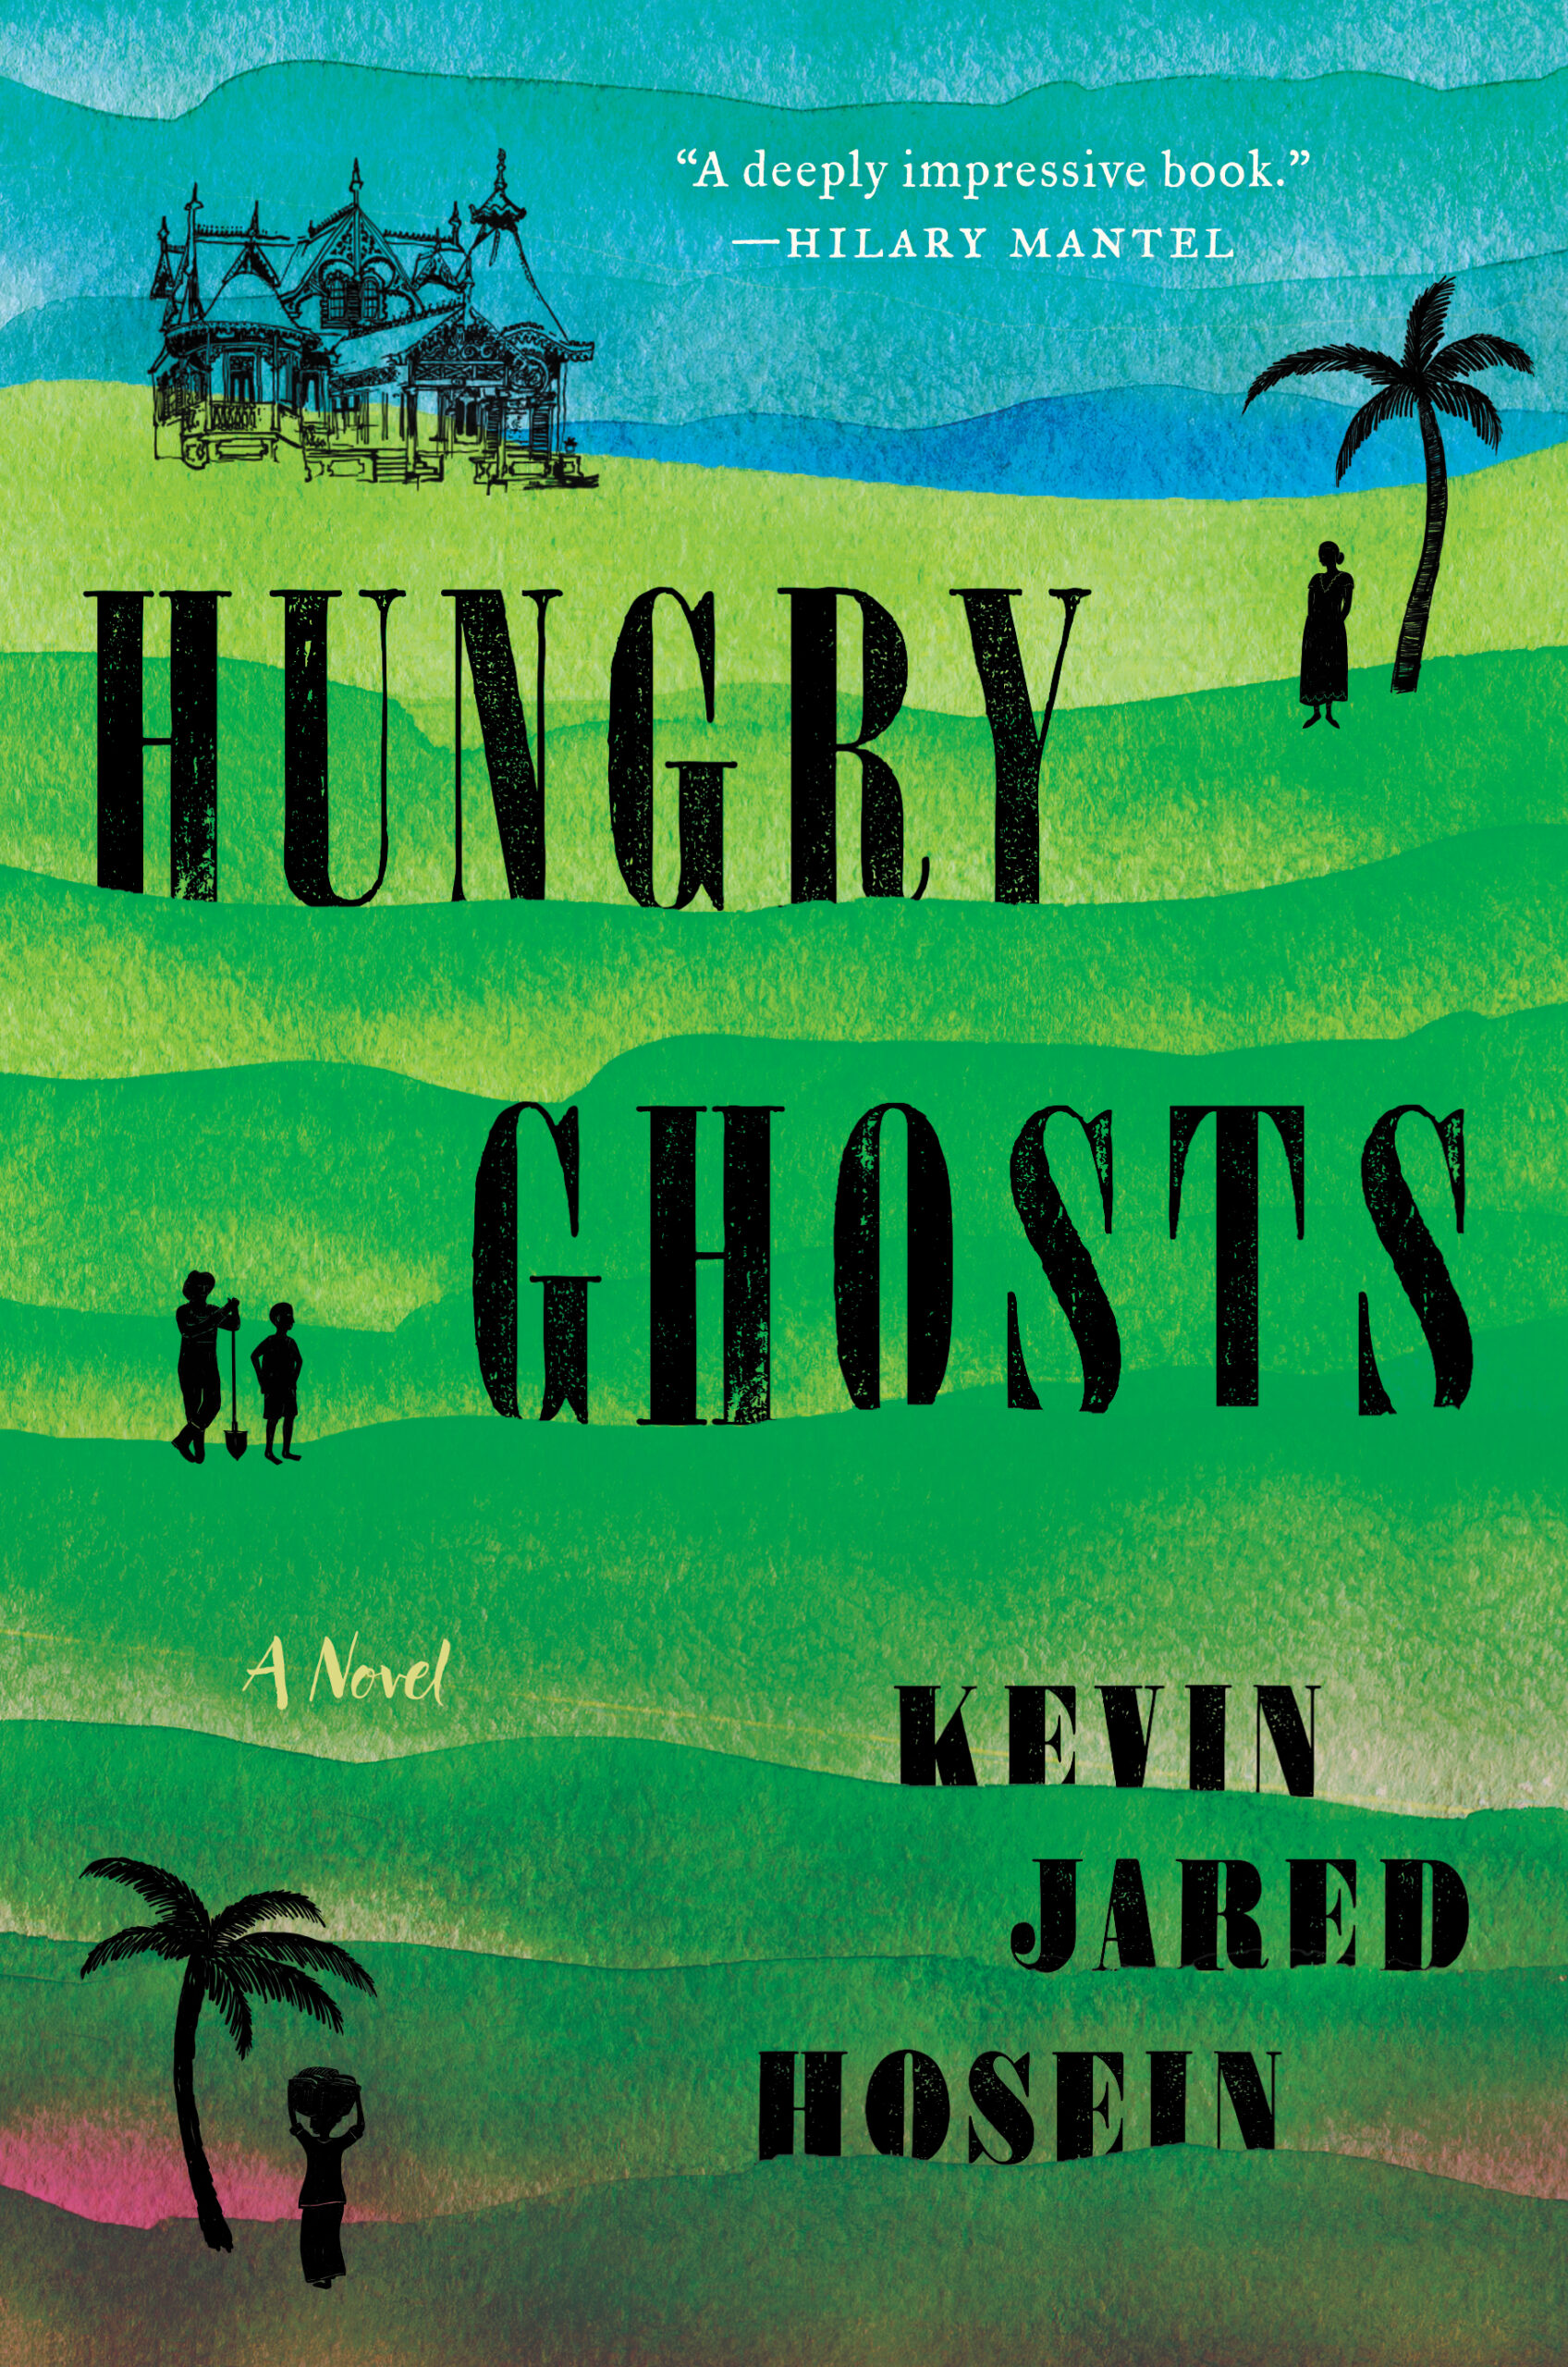 Phantoms of Hungry Ghosts by Kevin Jared Hosein Historical Novel